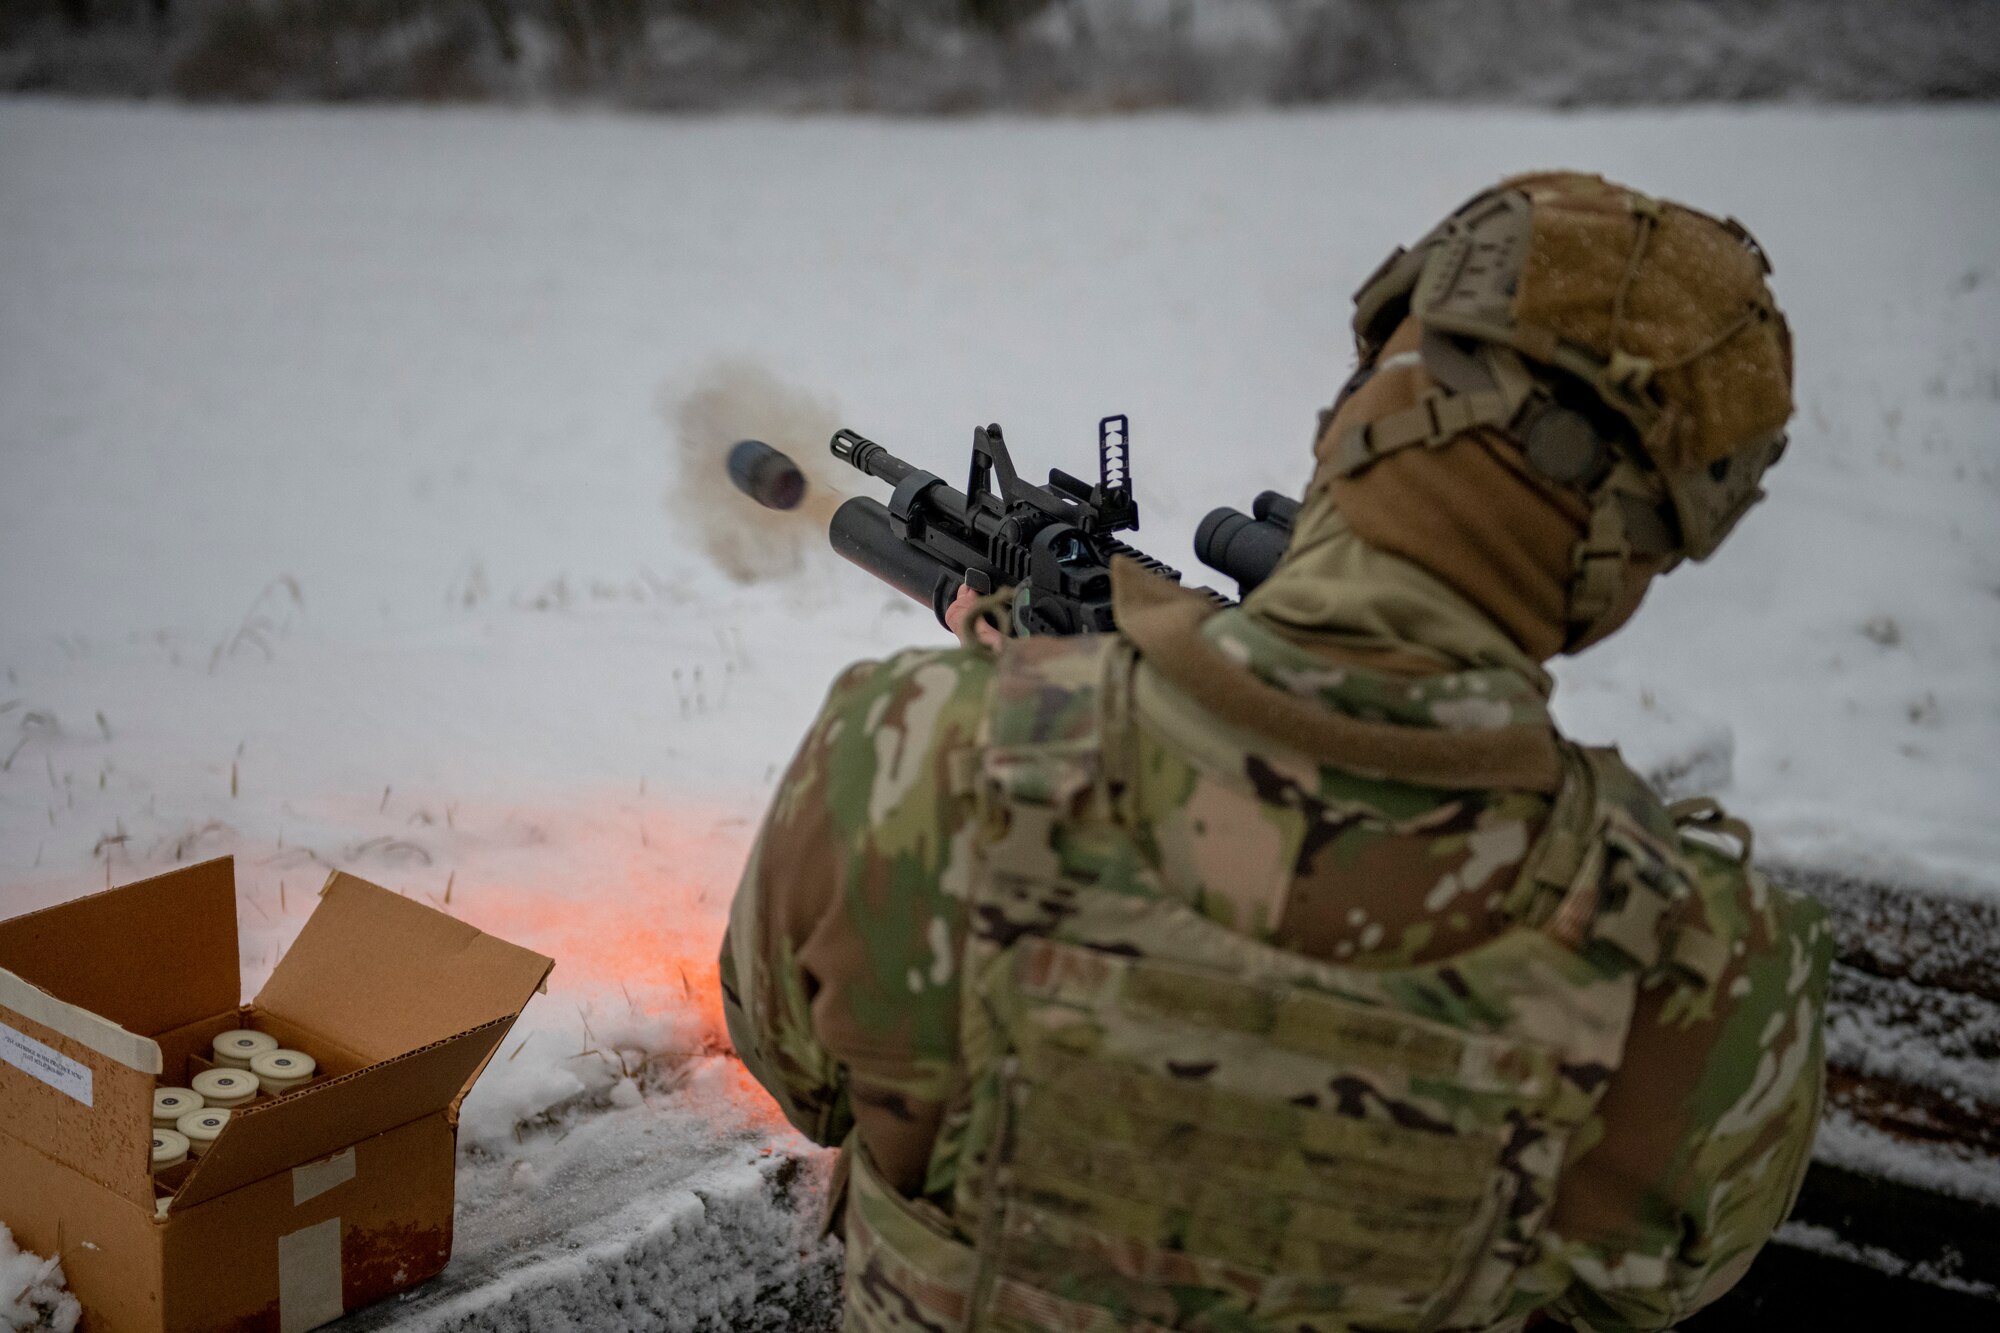 A U.S. Air Force security forces member shoots an M203 grenade launcher.